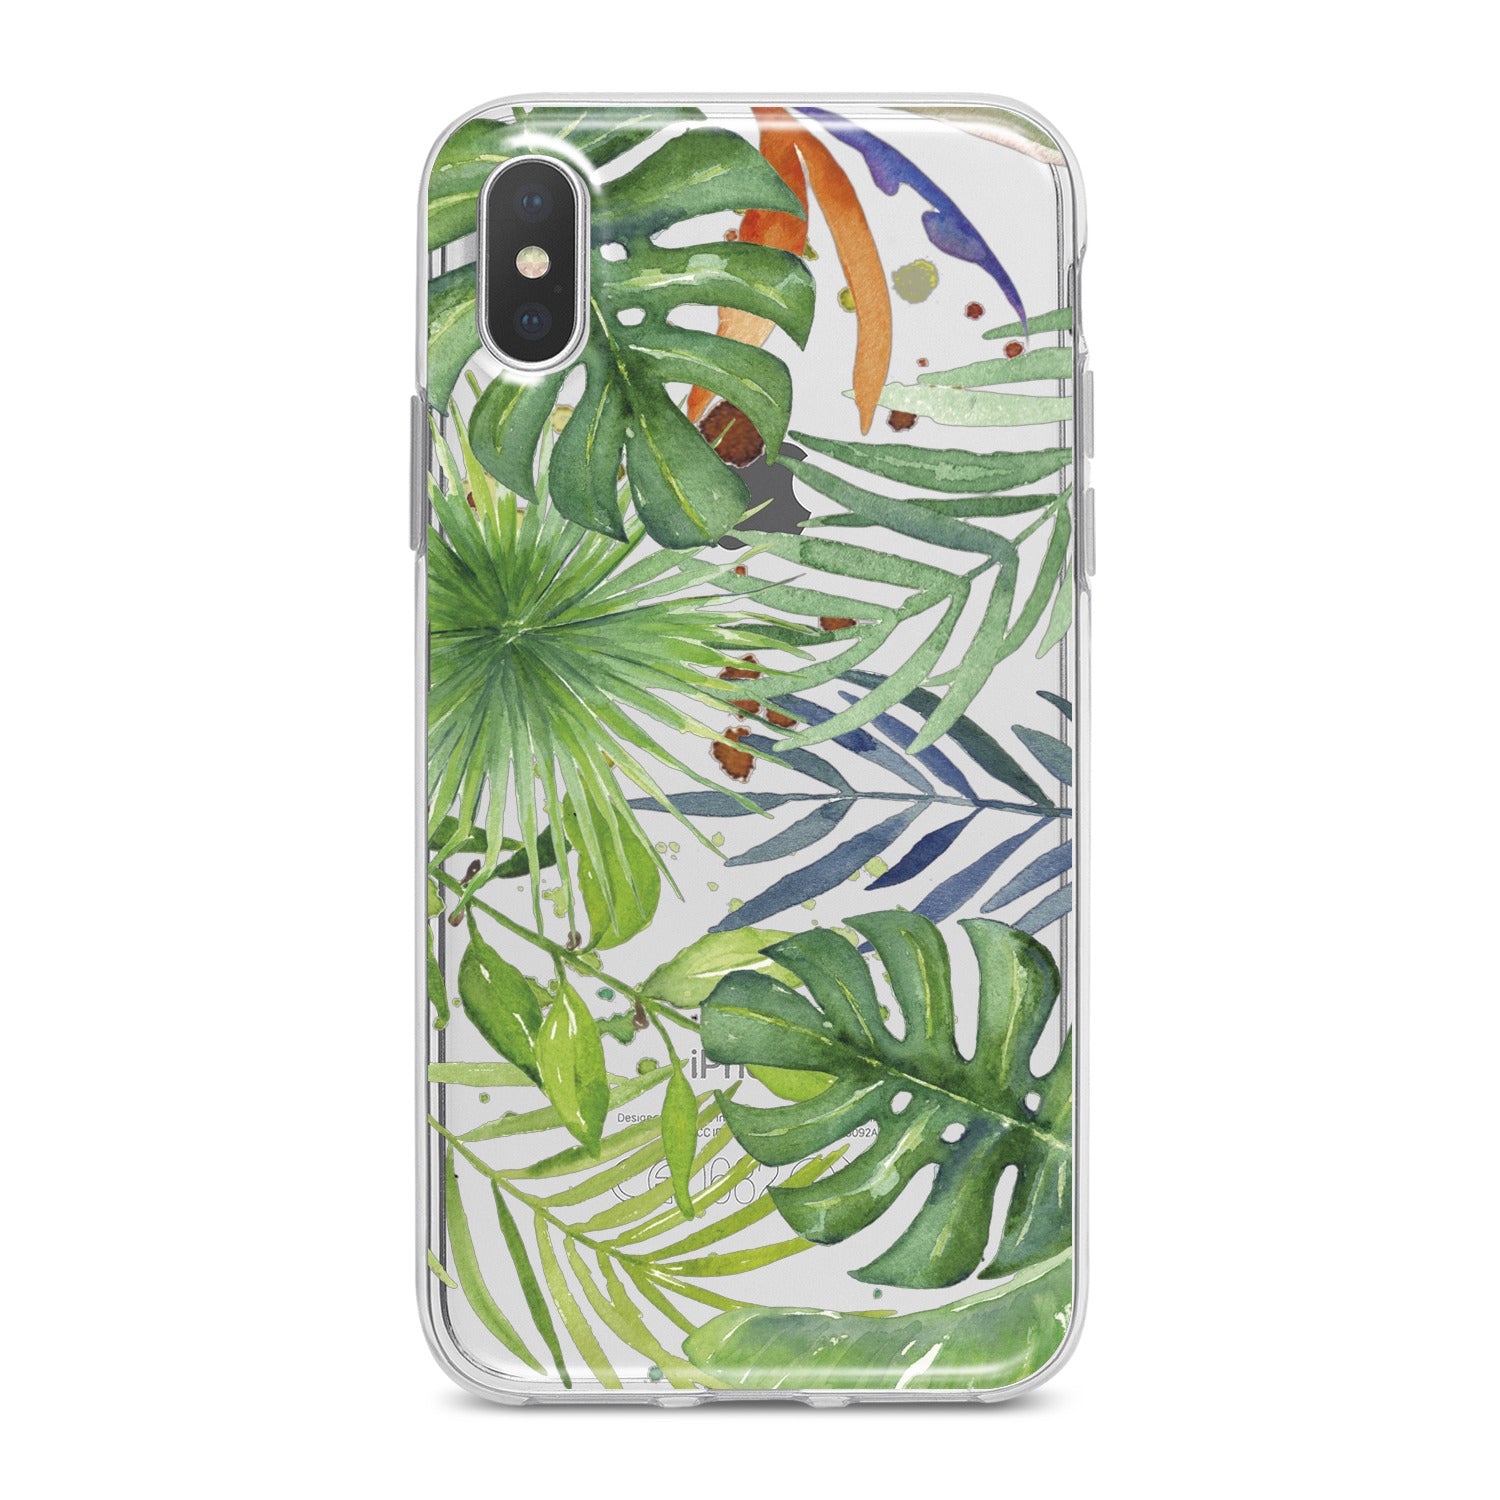 Lex Altern Green Monstera Pattern Phone Case for your iPhone & Android phone.